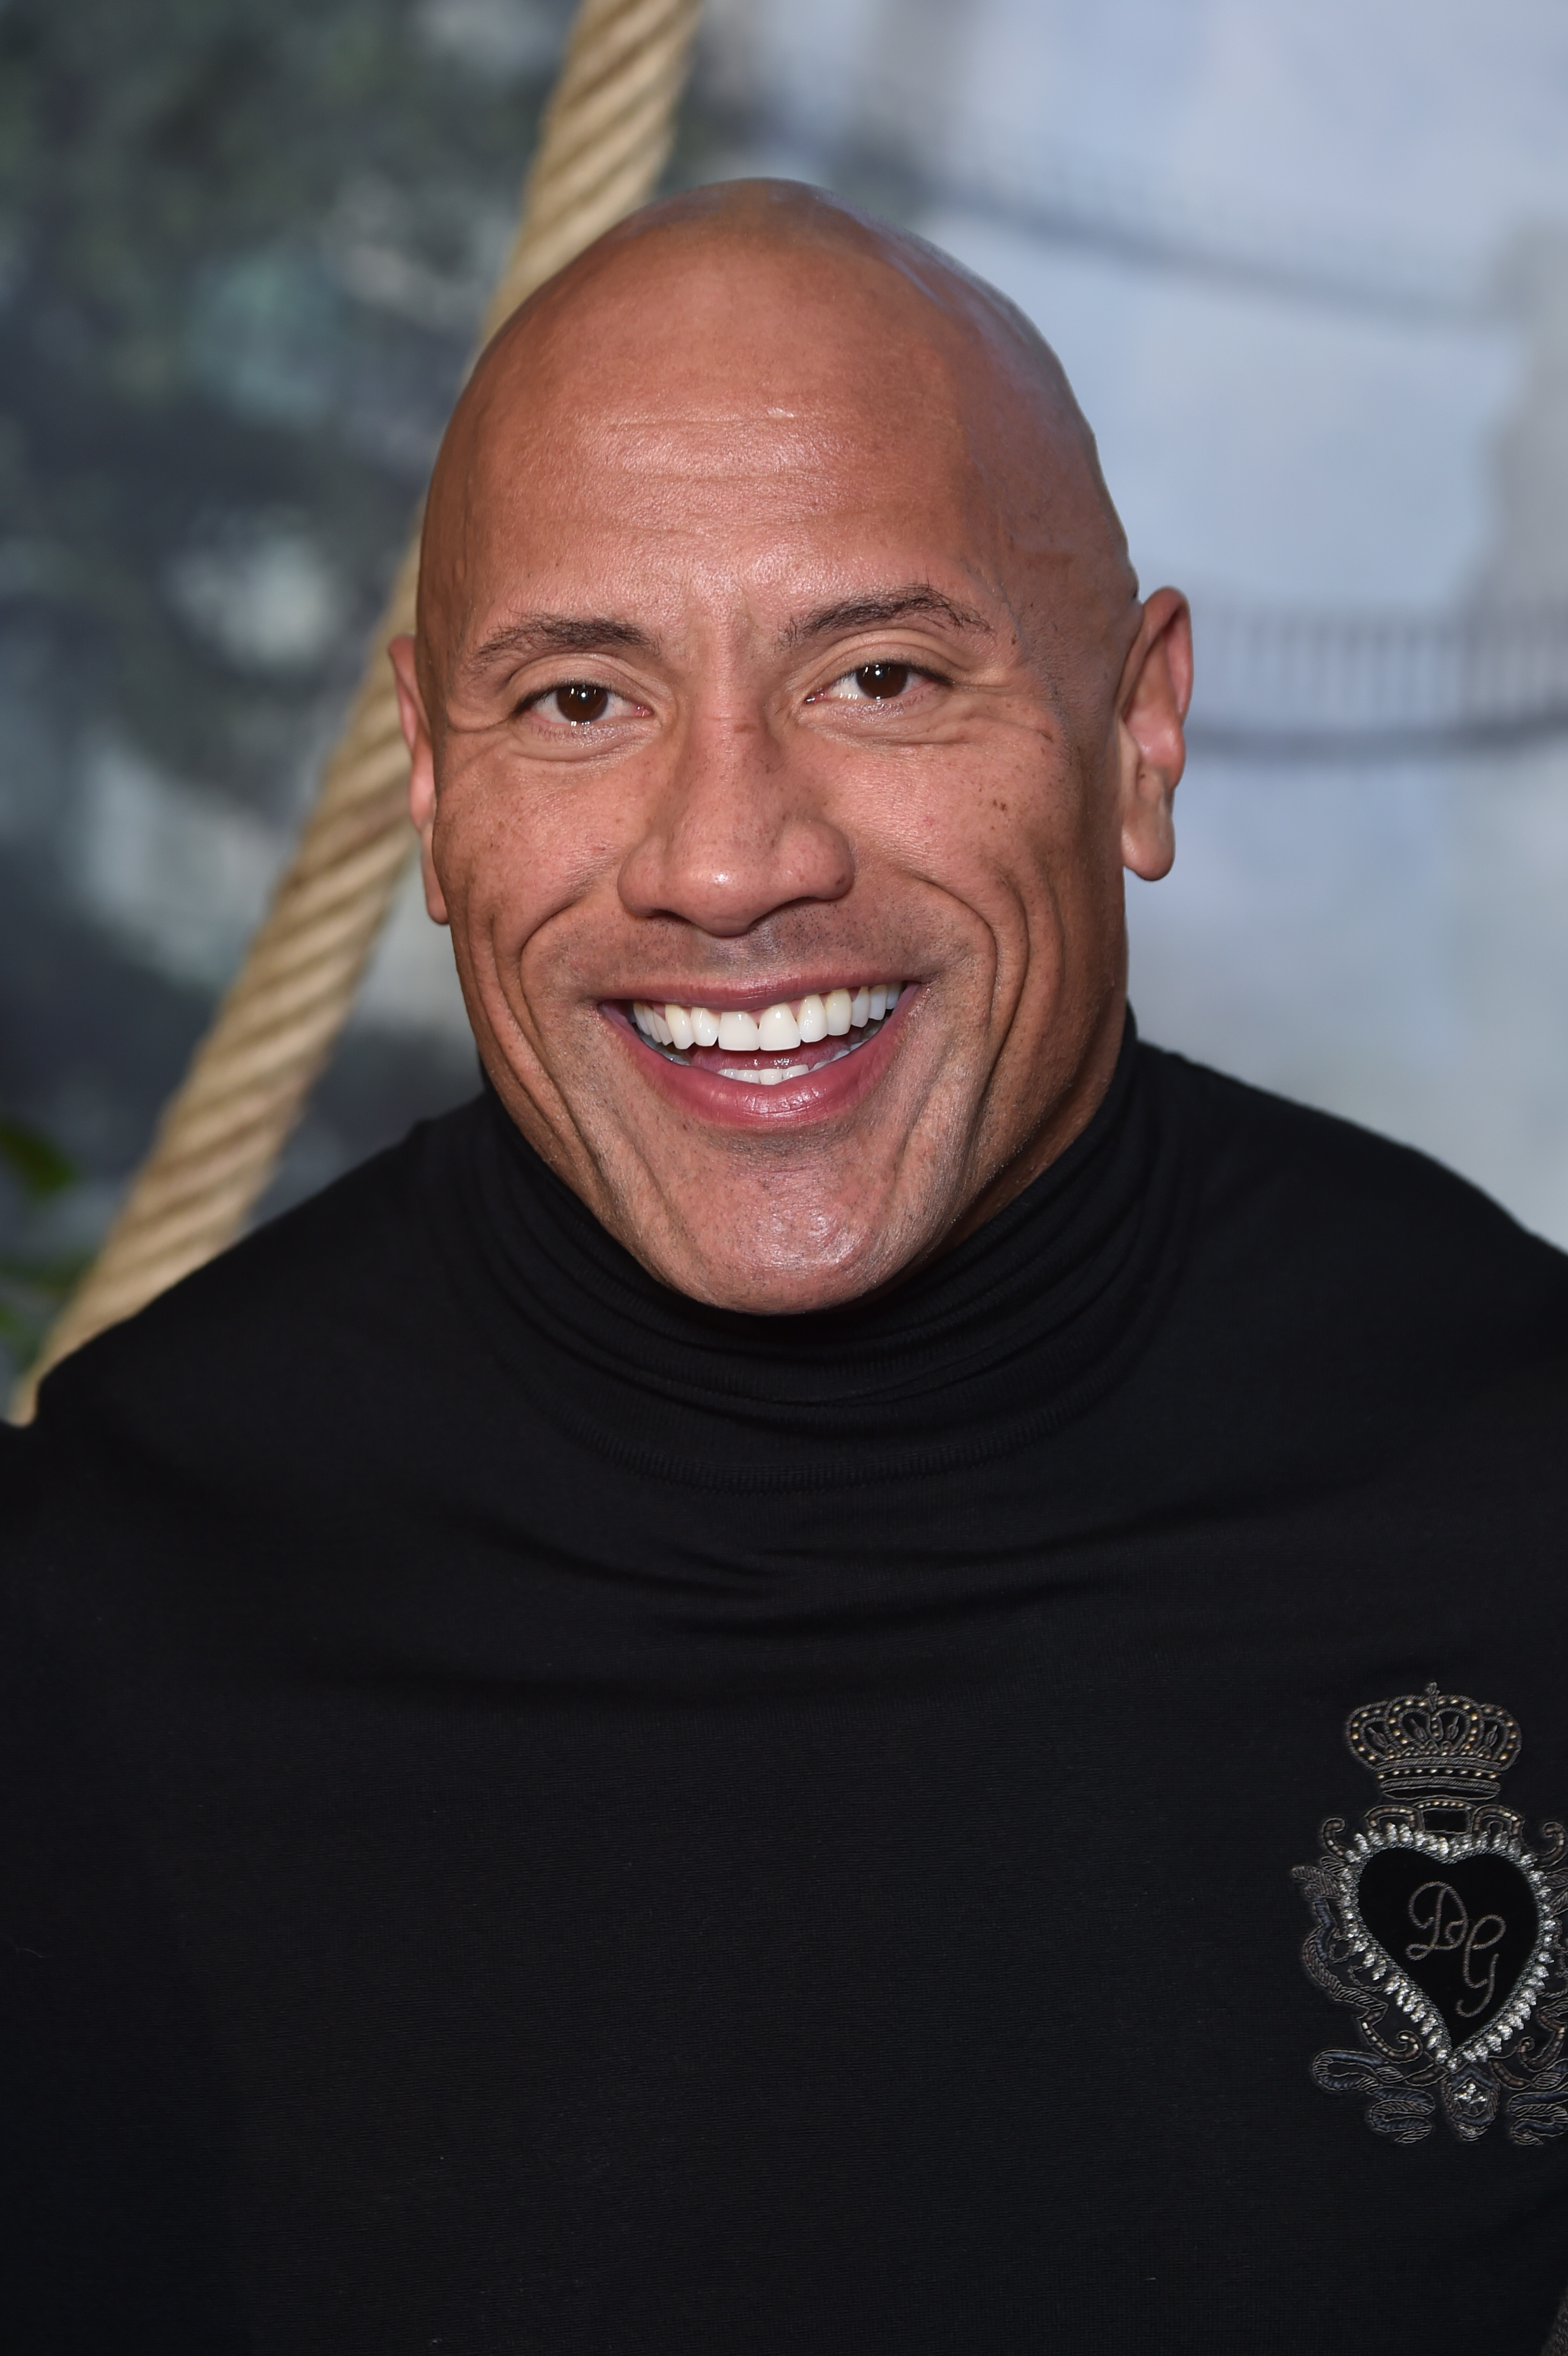 Dwayne Johnson at the photocall for the film "Jumanji: Next Level" at Le Grand Rex on December 3, 2019, in Paris, France | Source: Getty Images